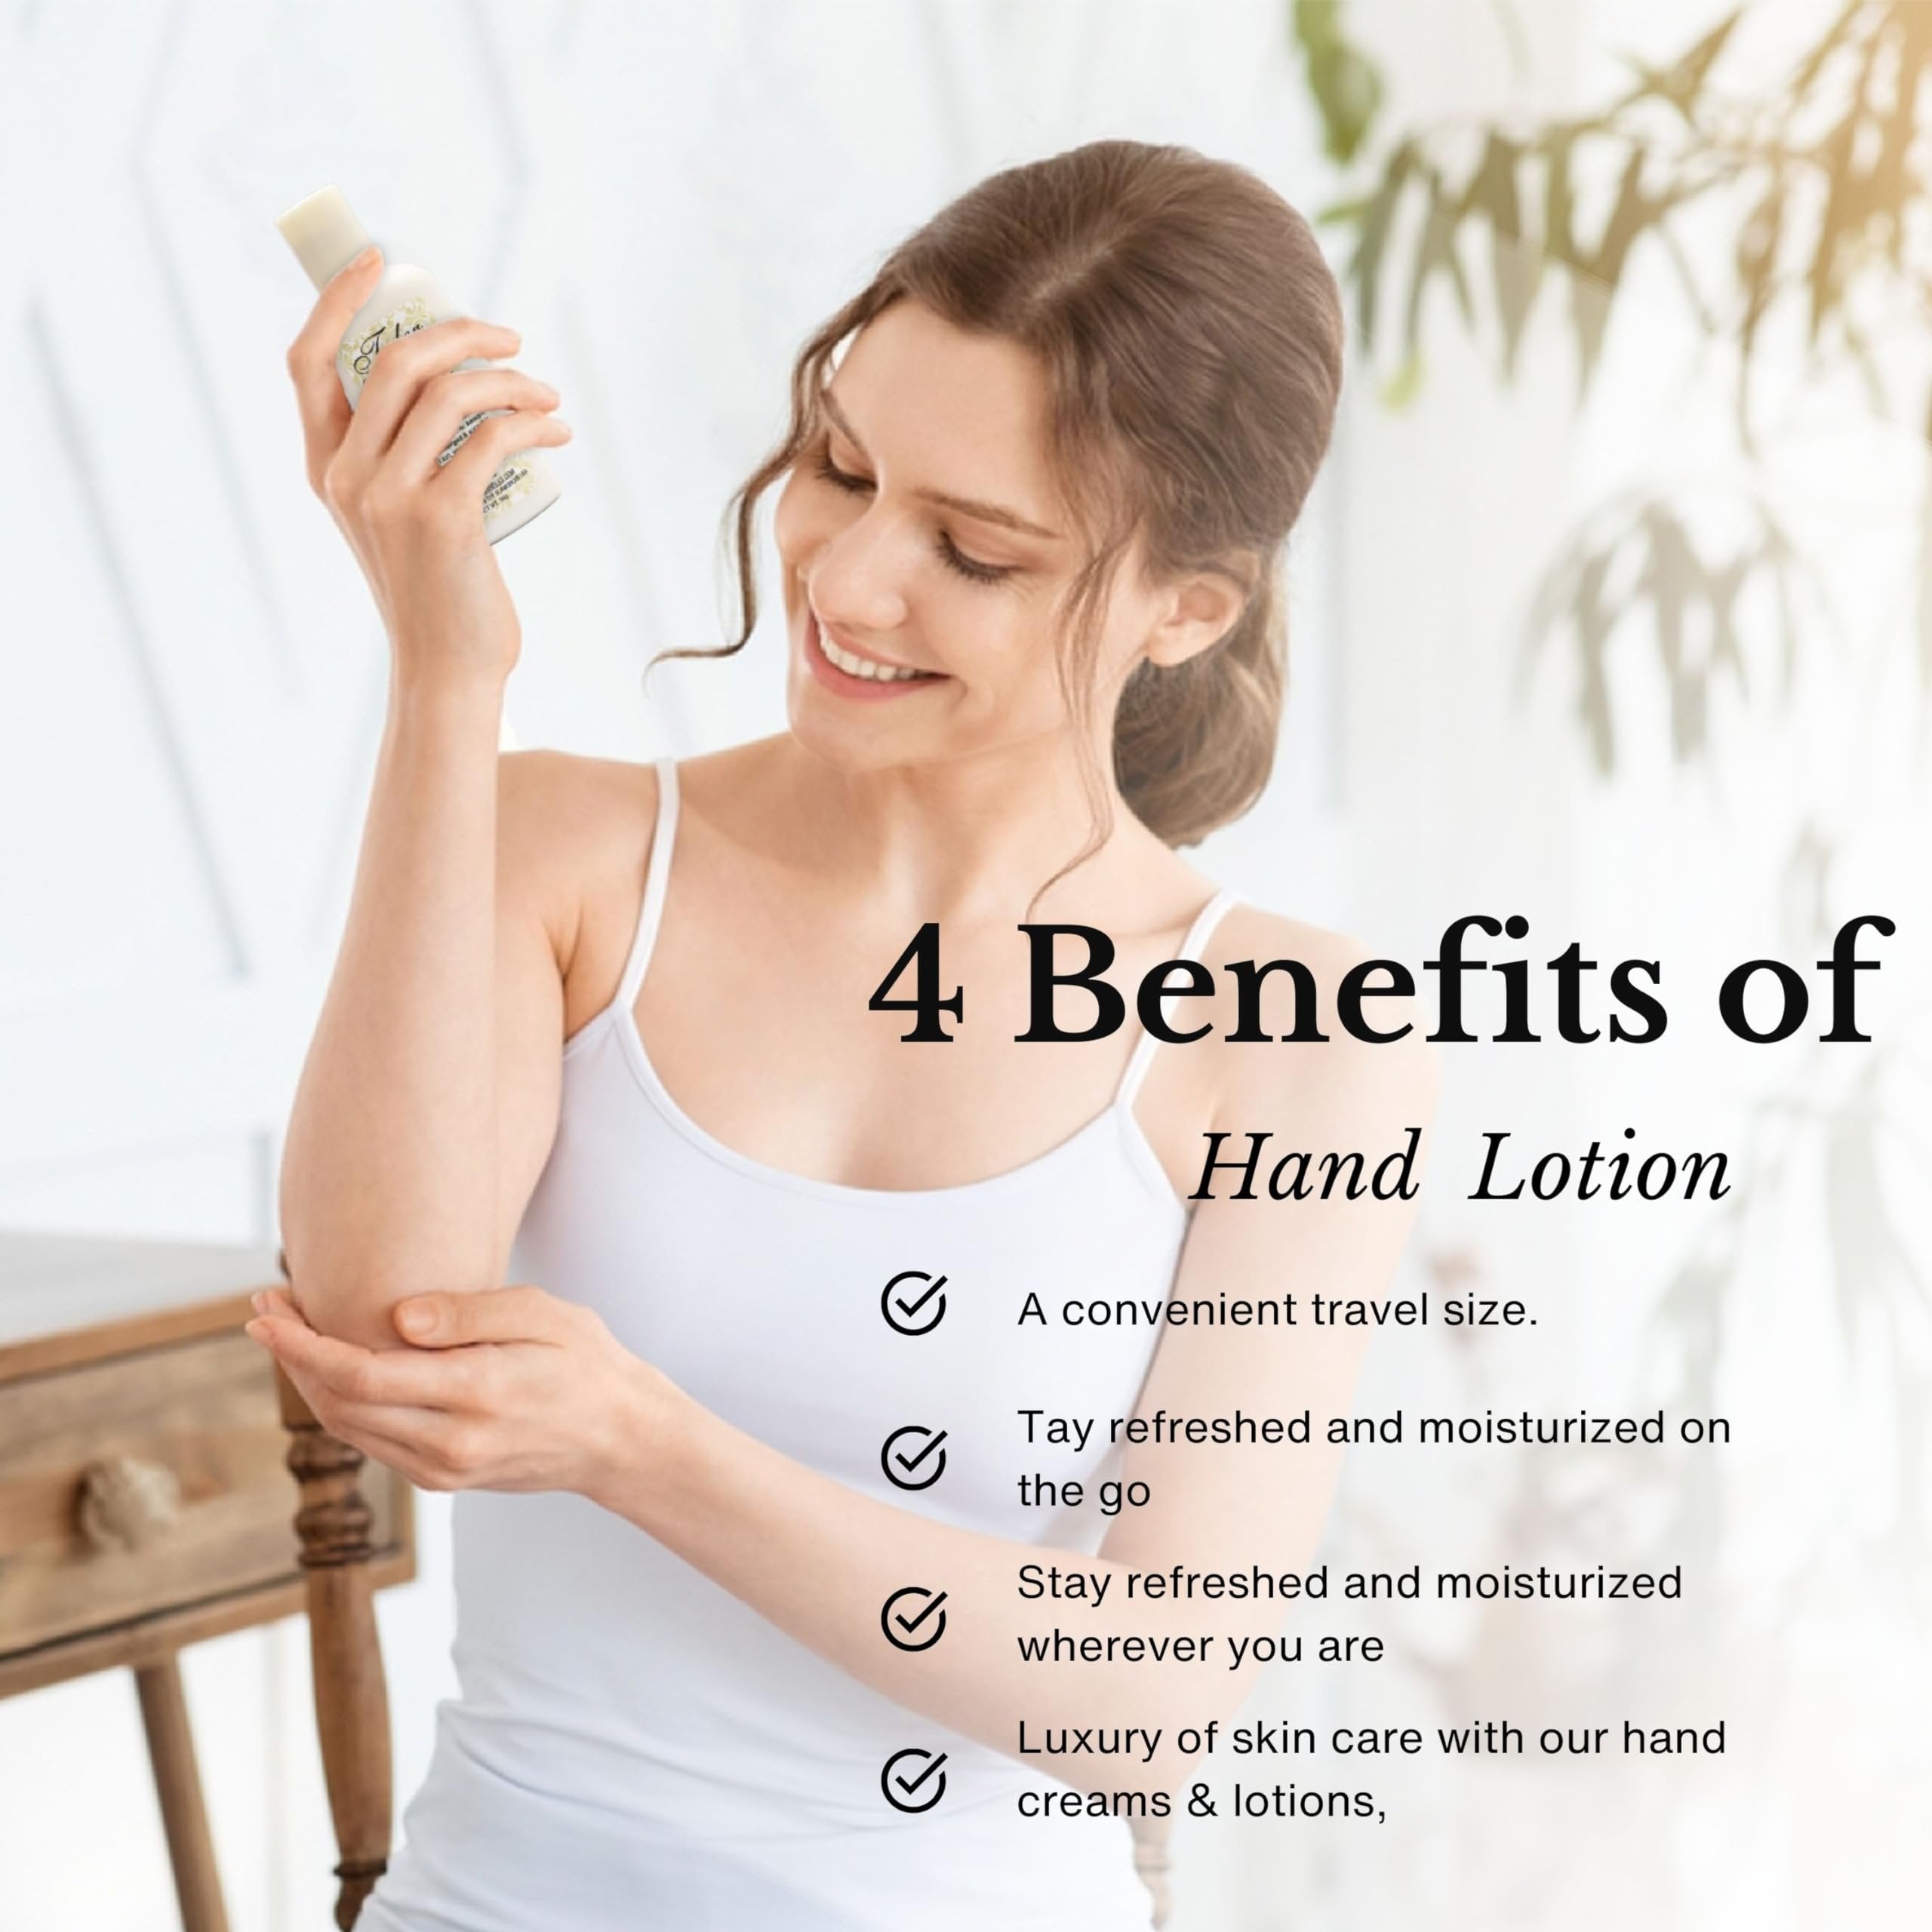 Tyler Kathina Hand Lotion - Scented & Small Hand Cream For Dry Hands w/Moisture-Boosting Skin- 2 Oz Travel Size Luxury Hand Moisturizer & Multi-Purpose Key Chain